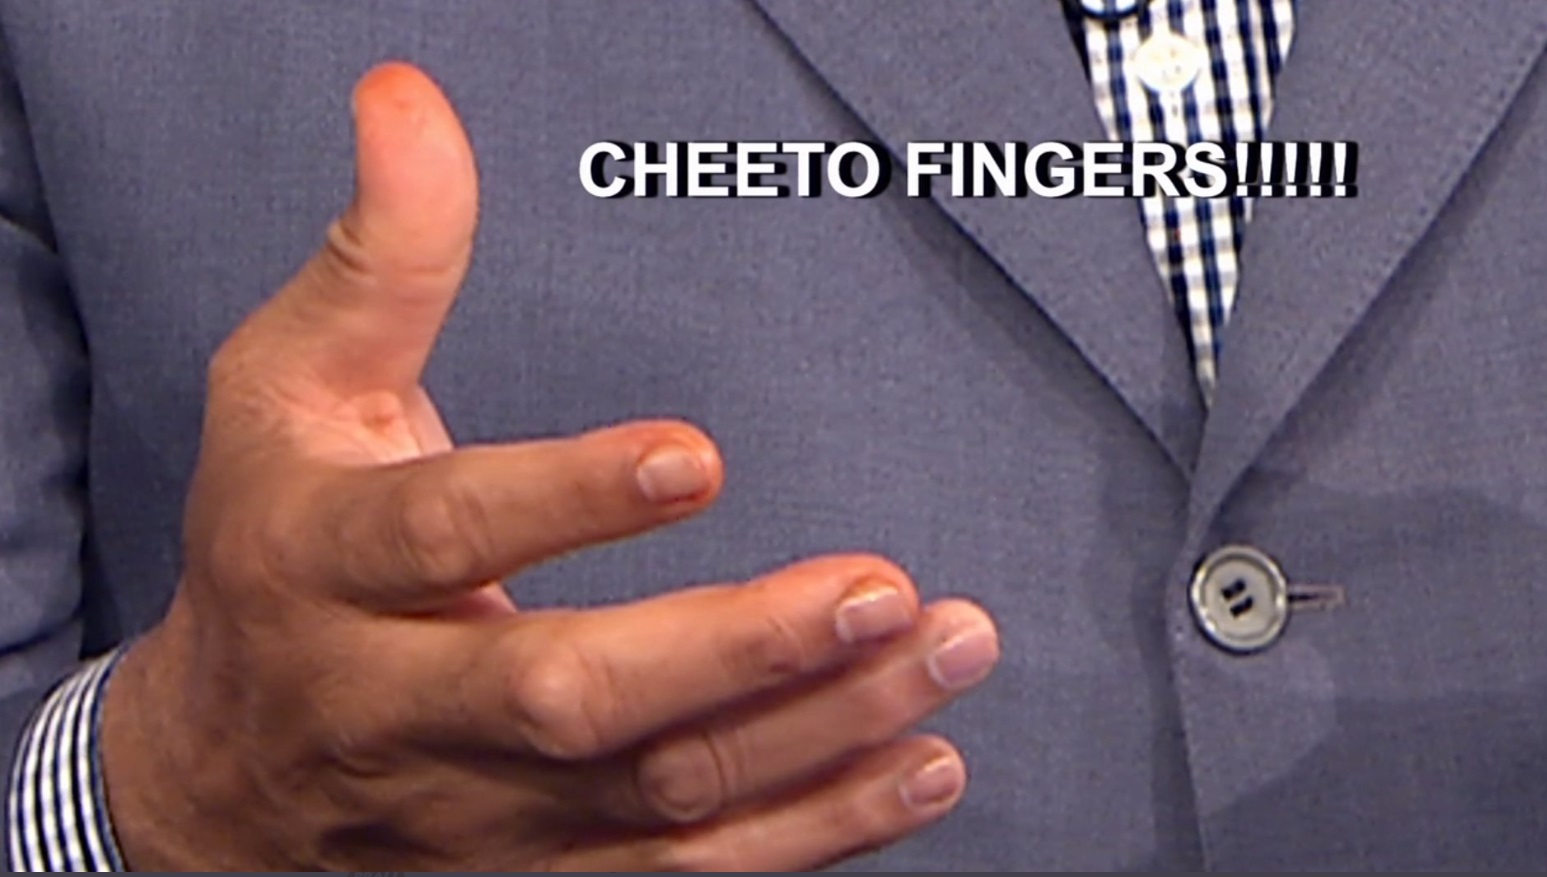 PHOTO Charles Barkley Has Cheetos All Over His Fingers